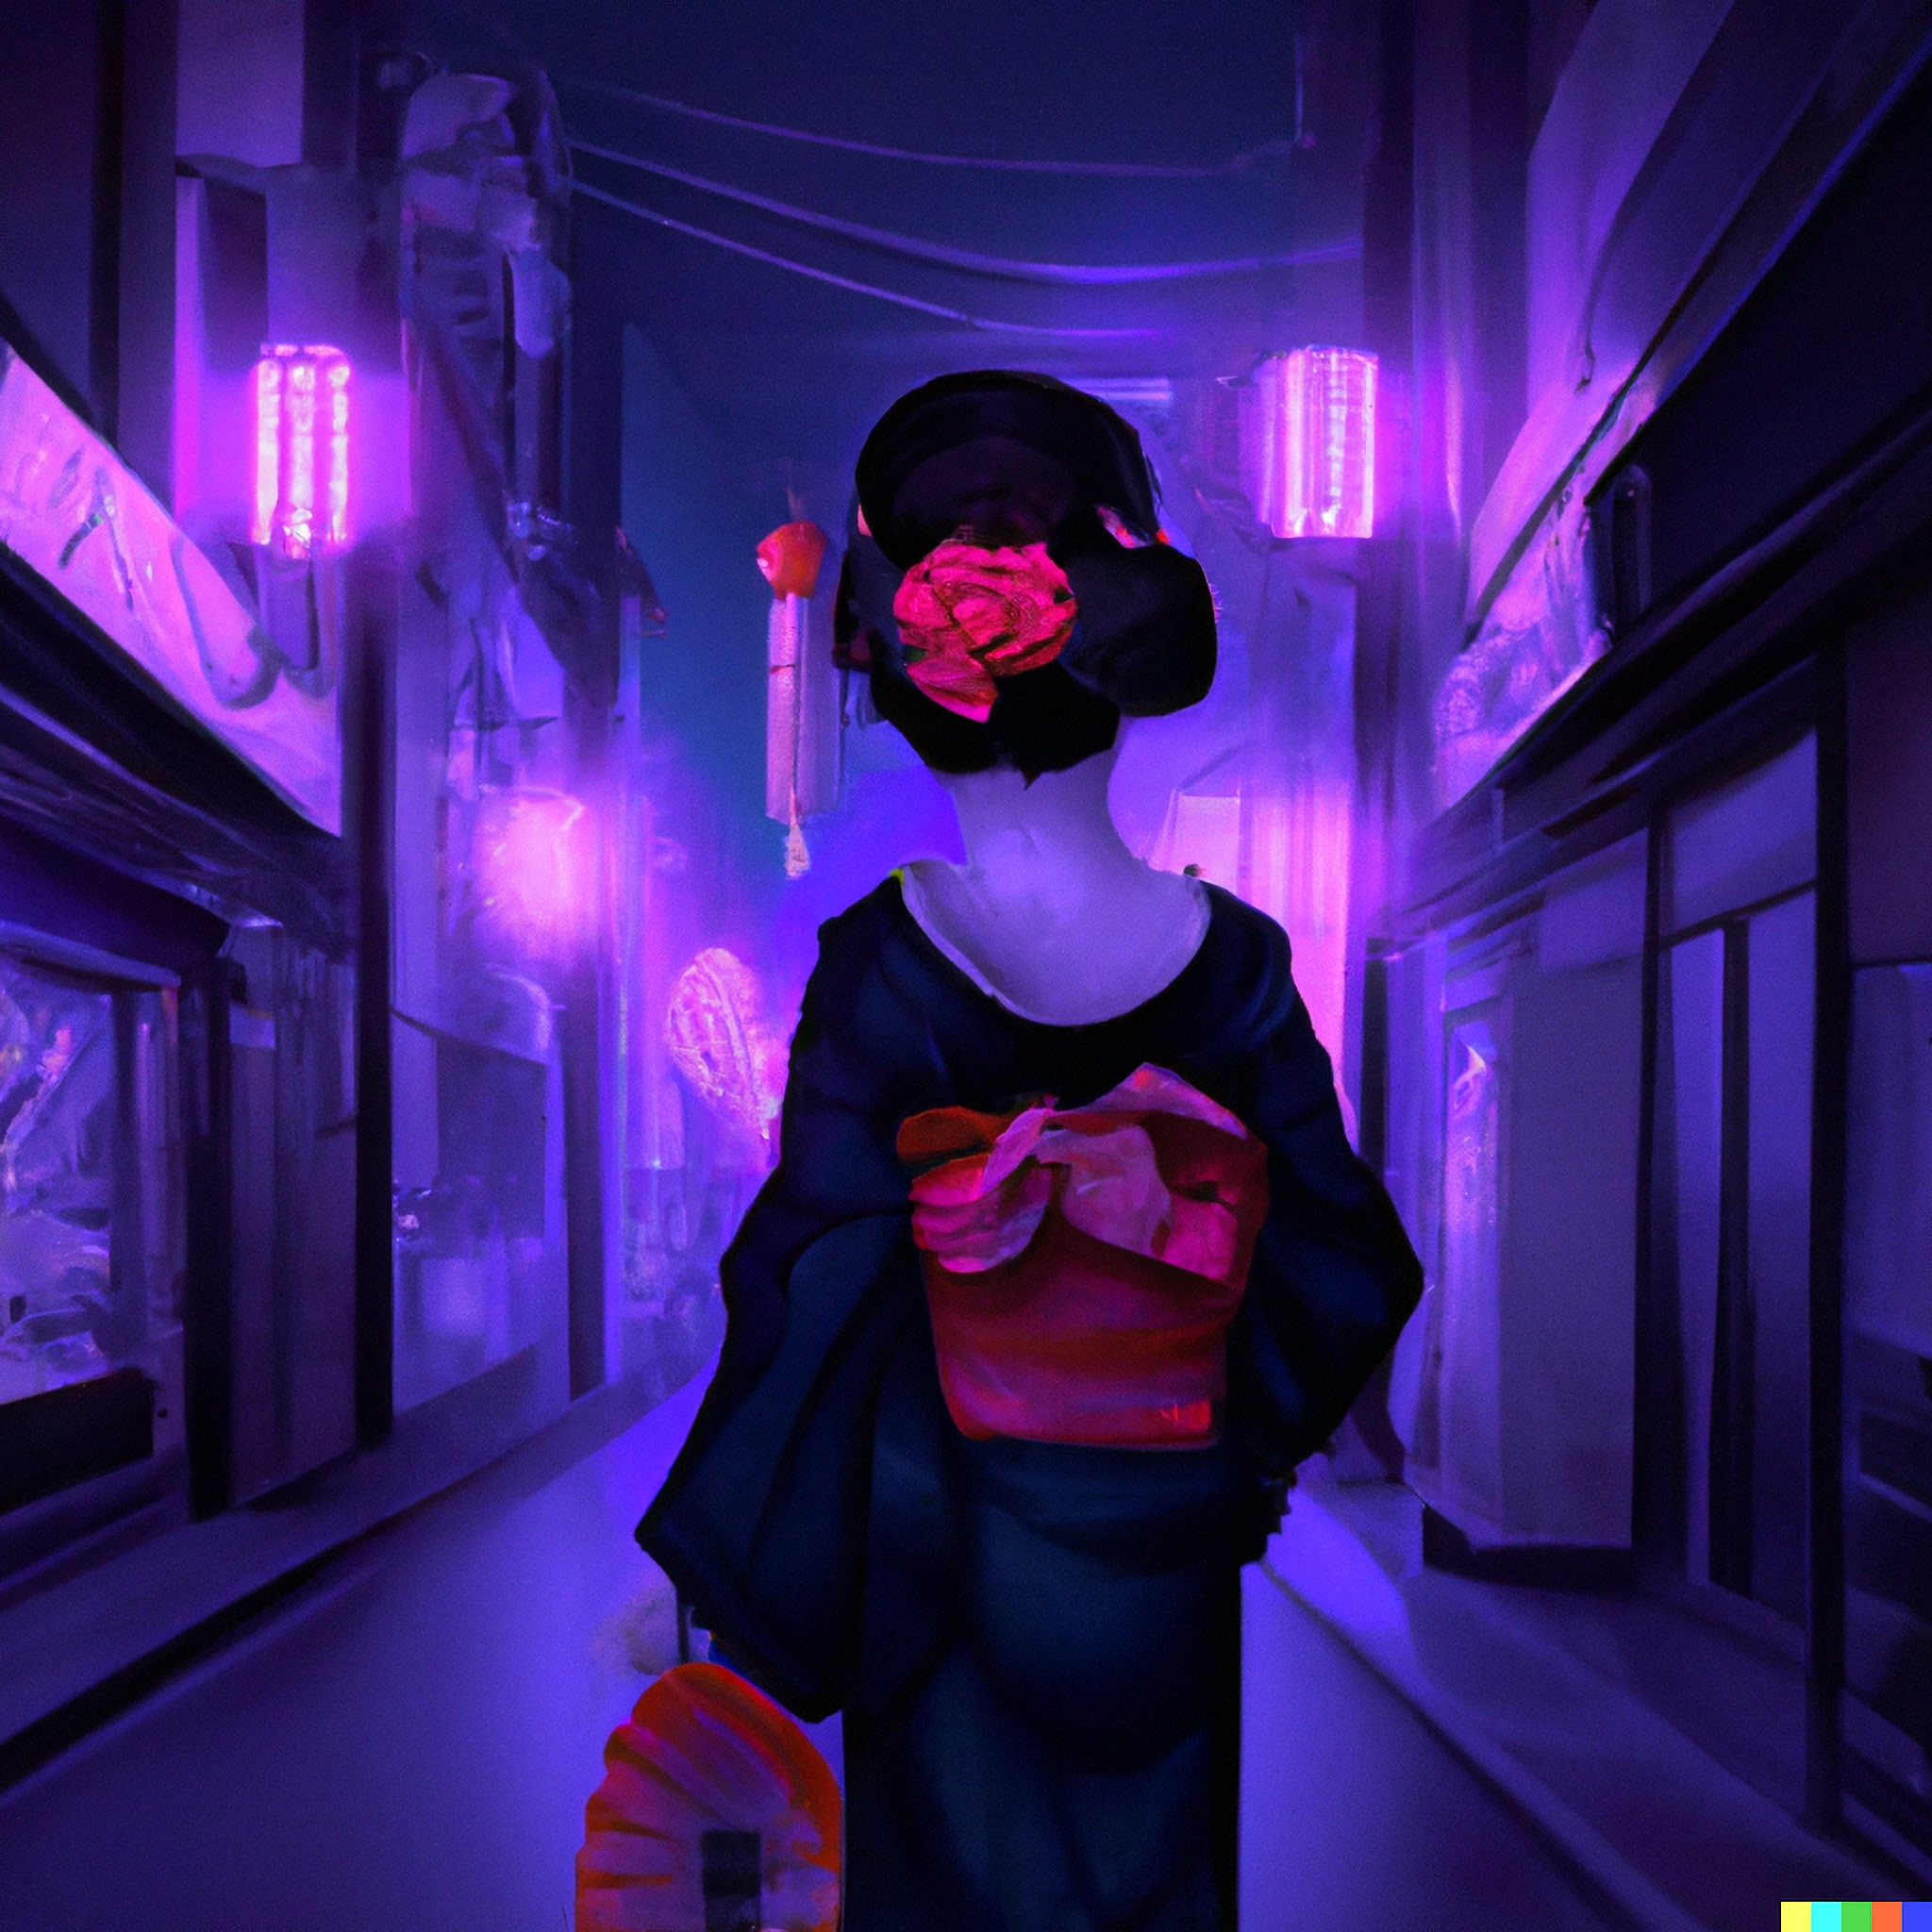 a-geisha-walking-in-the-night-through-the-streets-of-tokyo-illuminated-by-neon-lights-4